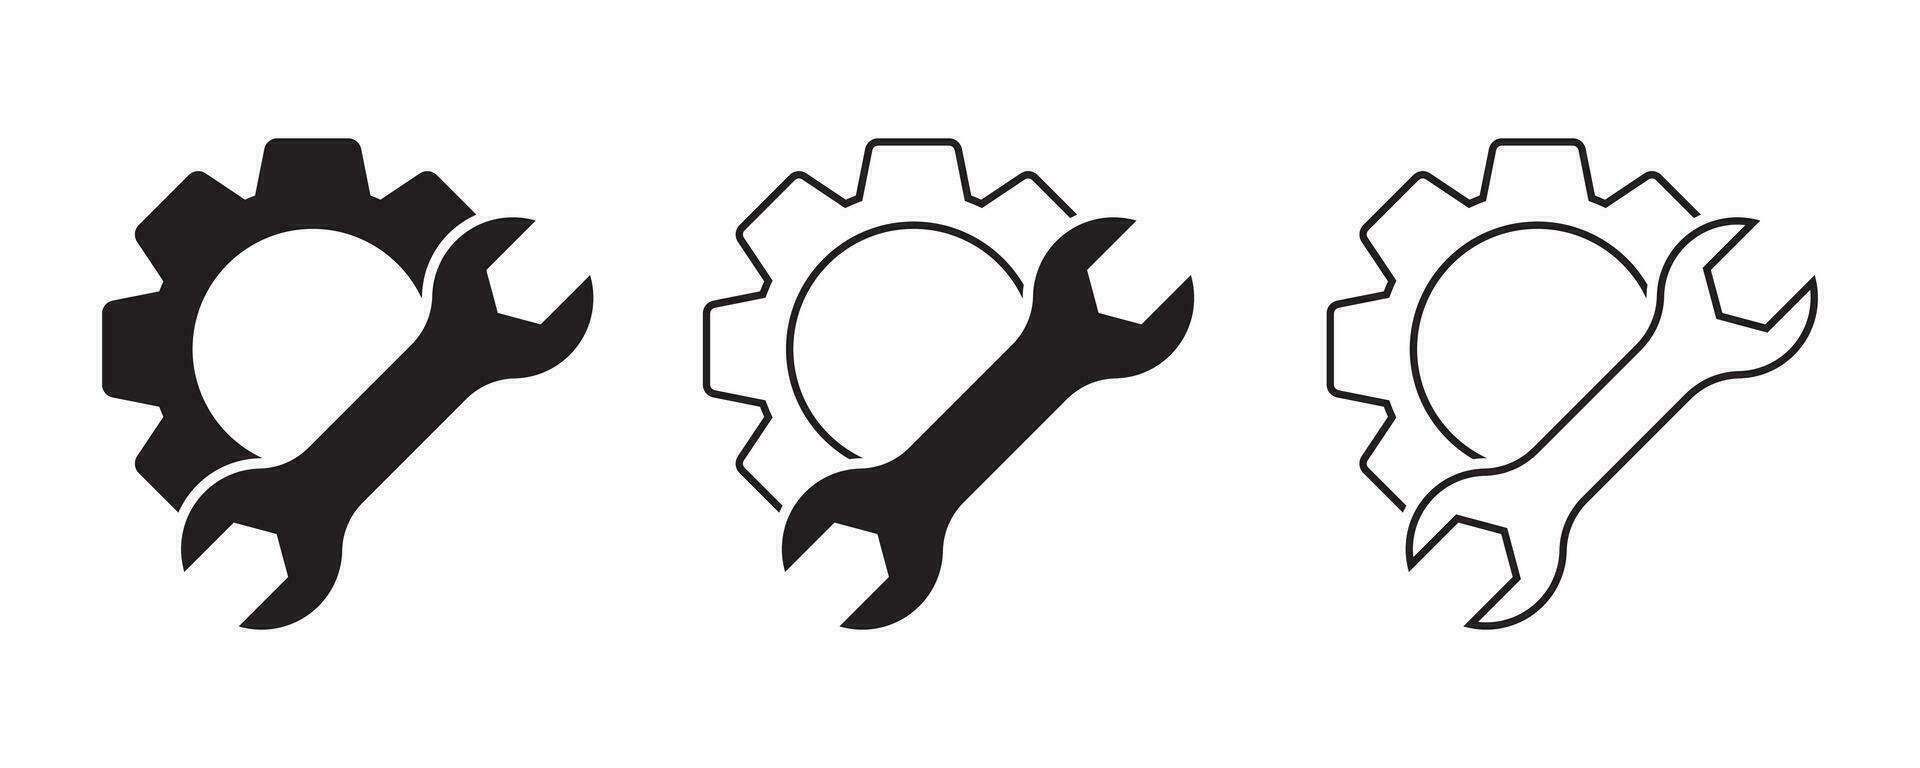 Manufacturing vector icons. Service vector icons set. Gear wheel and wrench icon.